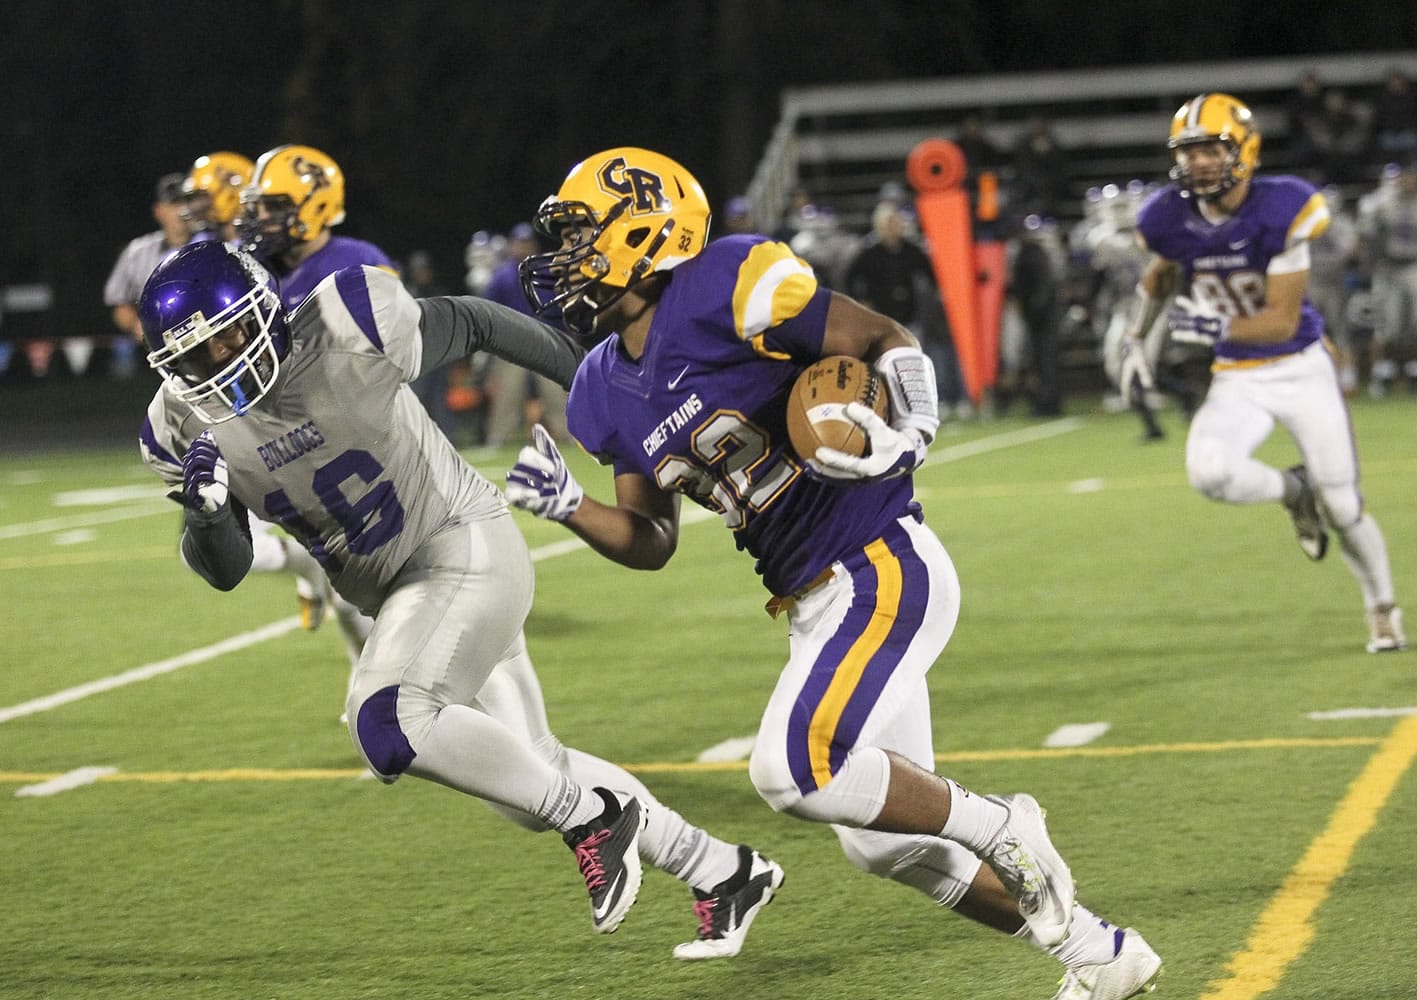 Columbia River's Nathan Hawthorne turns upfield on a pass reception against Garfield on Saturday at Kiggins Bowl.